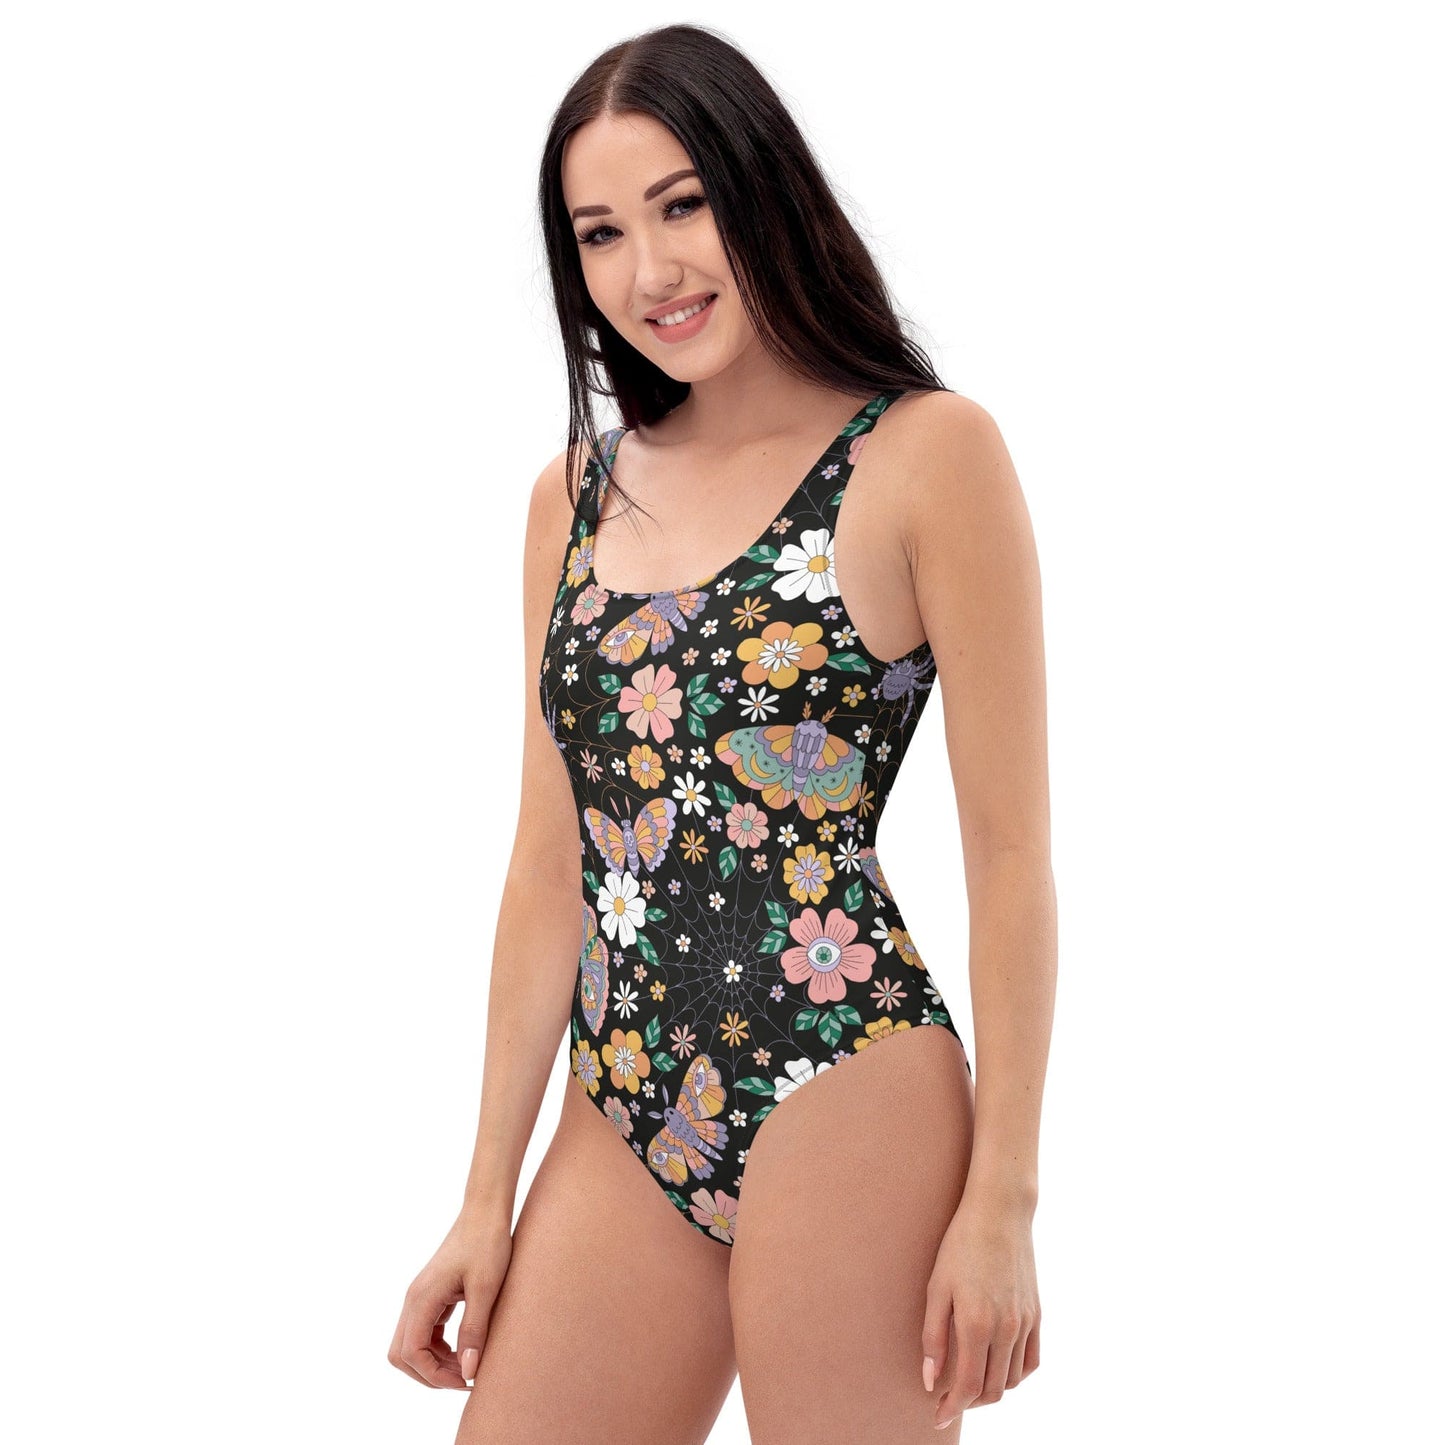 Psychedelic Spooky One Piece Swimsuit